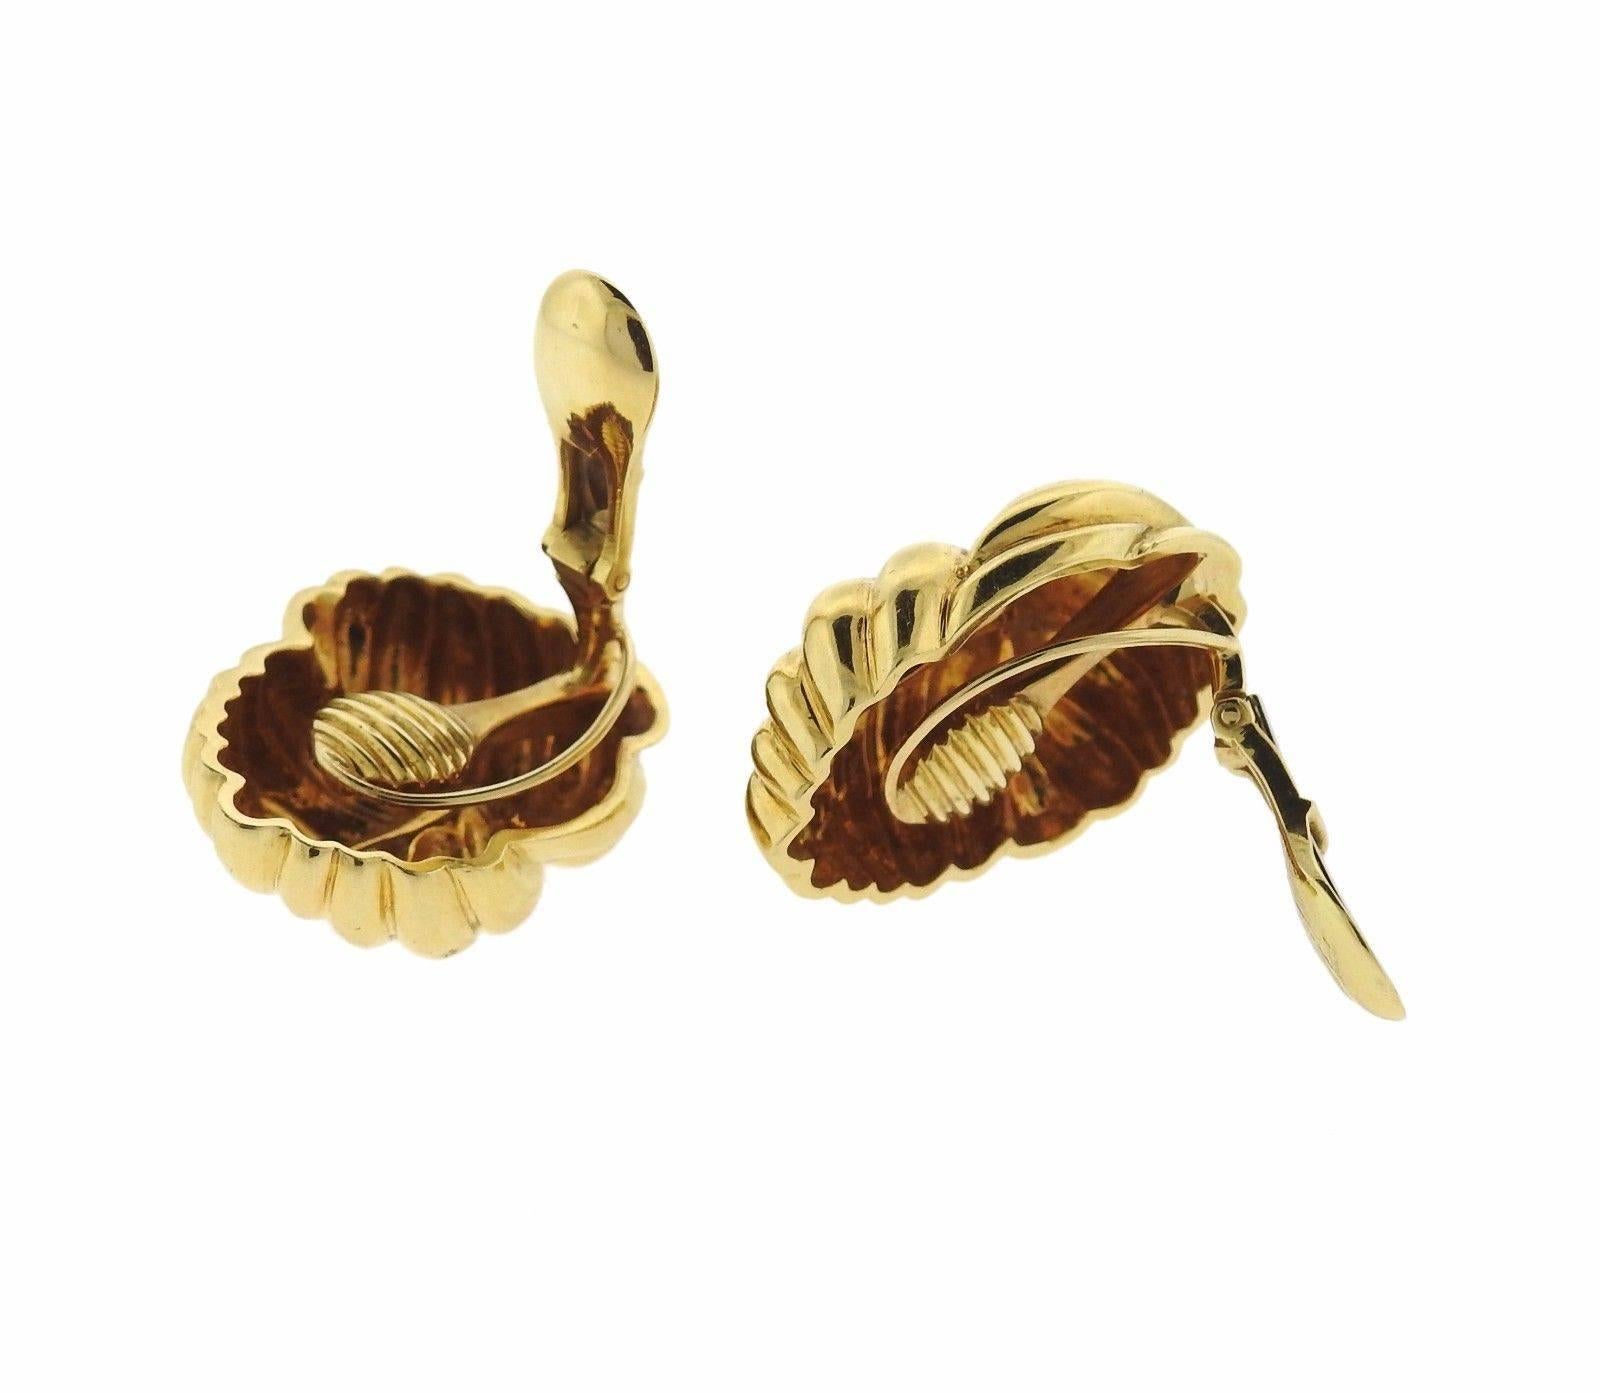 A pair of 18K gold knot earrings by David Webb.  The earrings measure 29mm x 21.5mm and weigh 32.6 grams.  Marked: Webb, 18K.